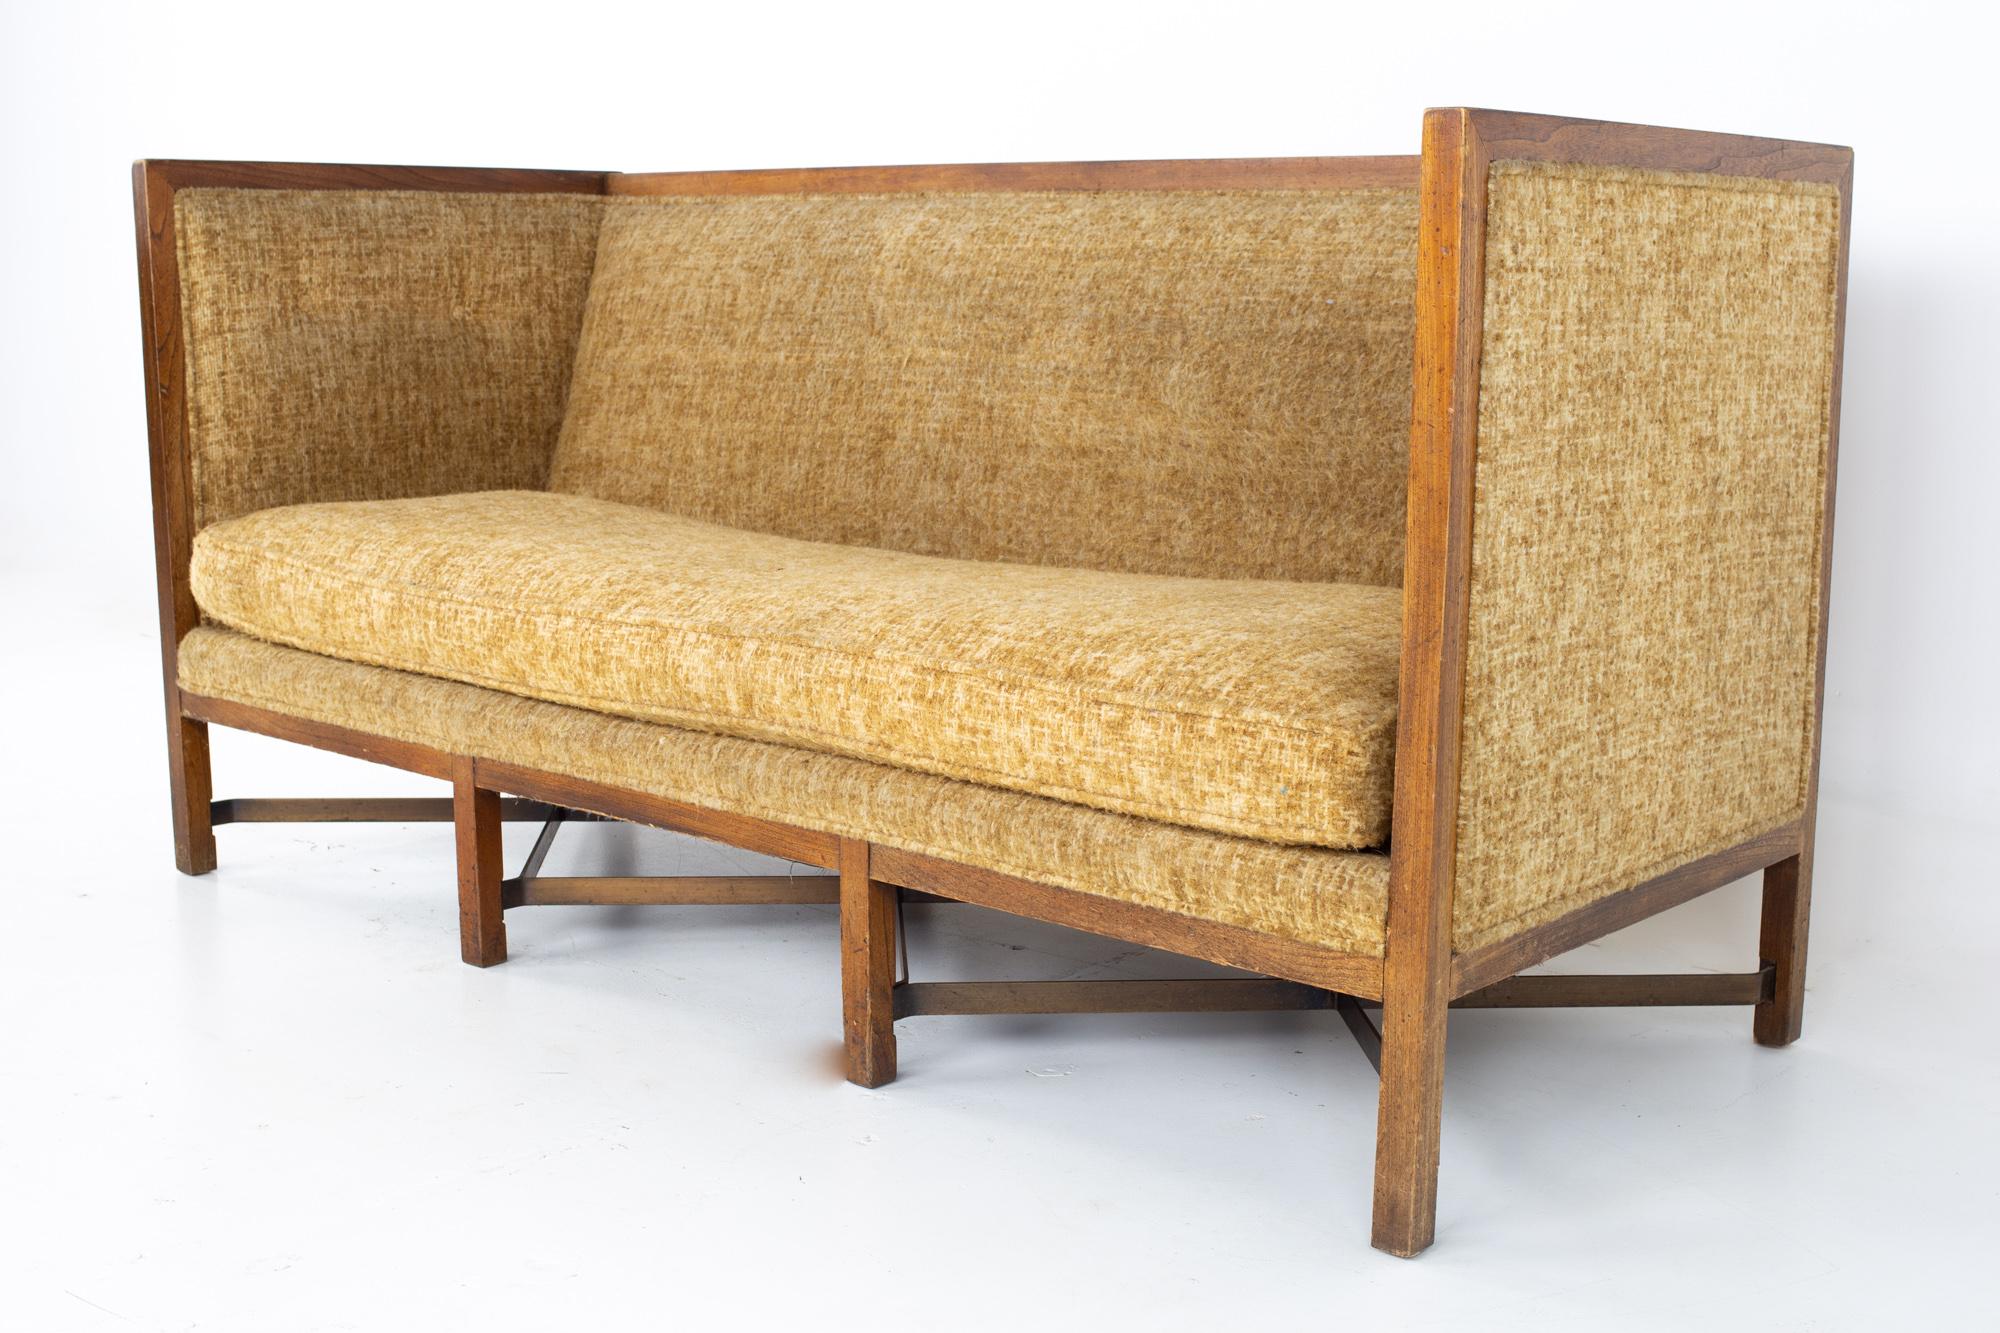 Paul McCobb style Mid Century walnut and brass shelter sofa
Sofa measures: 73 wide x 29 deep x 35 high, with a seat height of 17 inches 

All pieces of furniture can be had in what we call restored vintage condition. That means the piece is